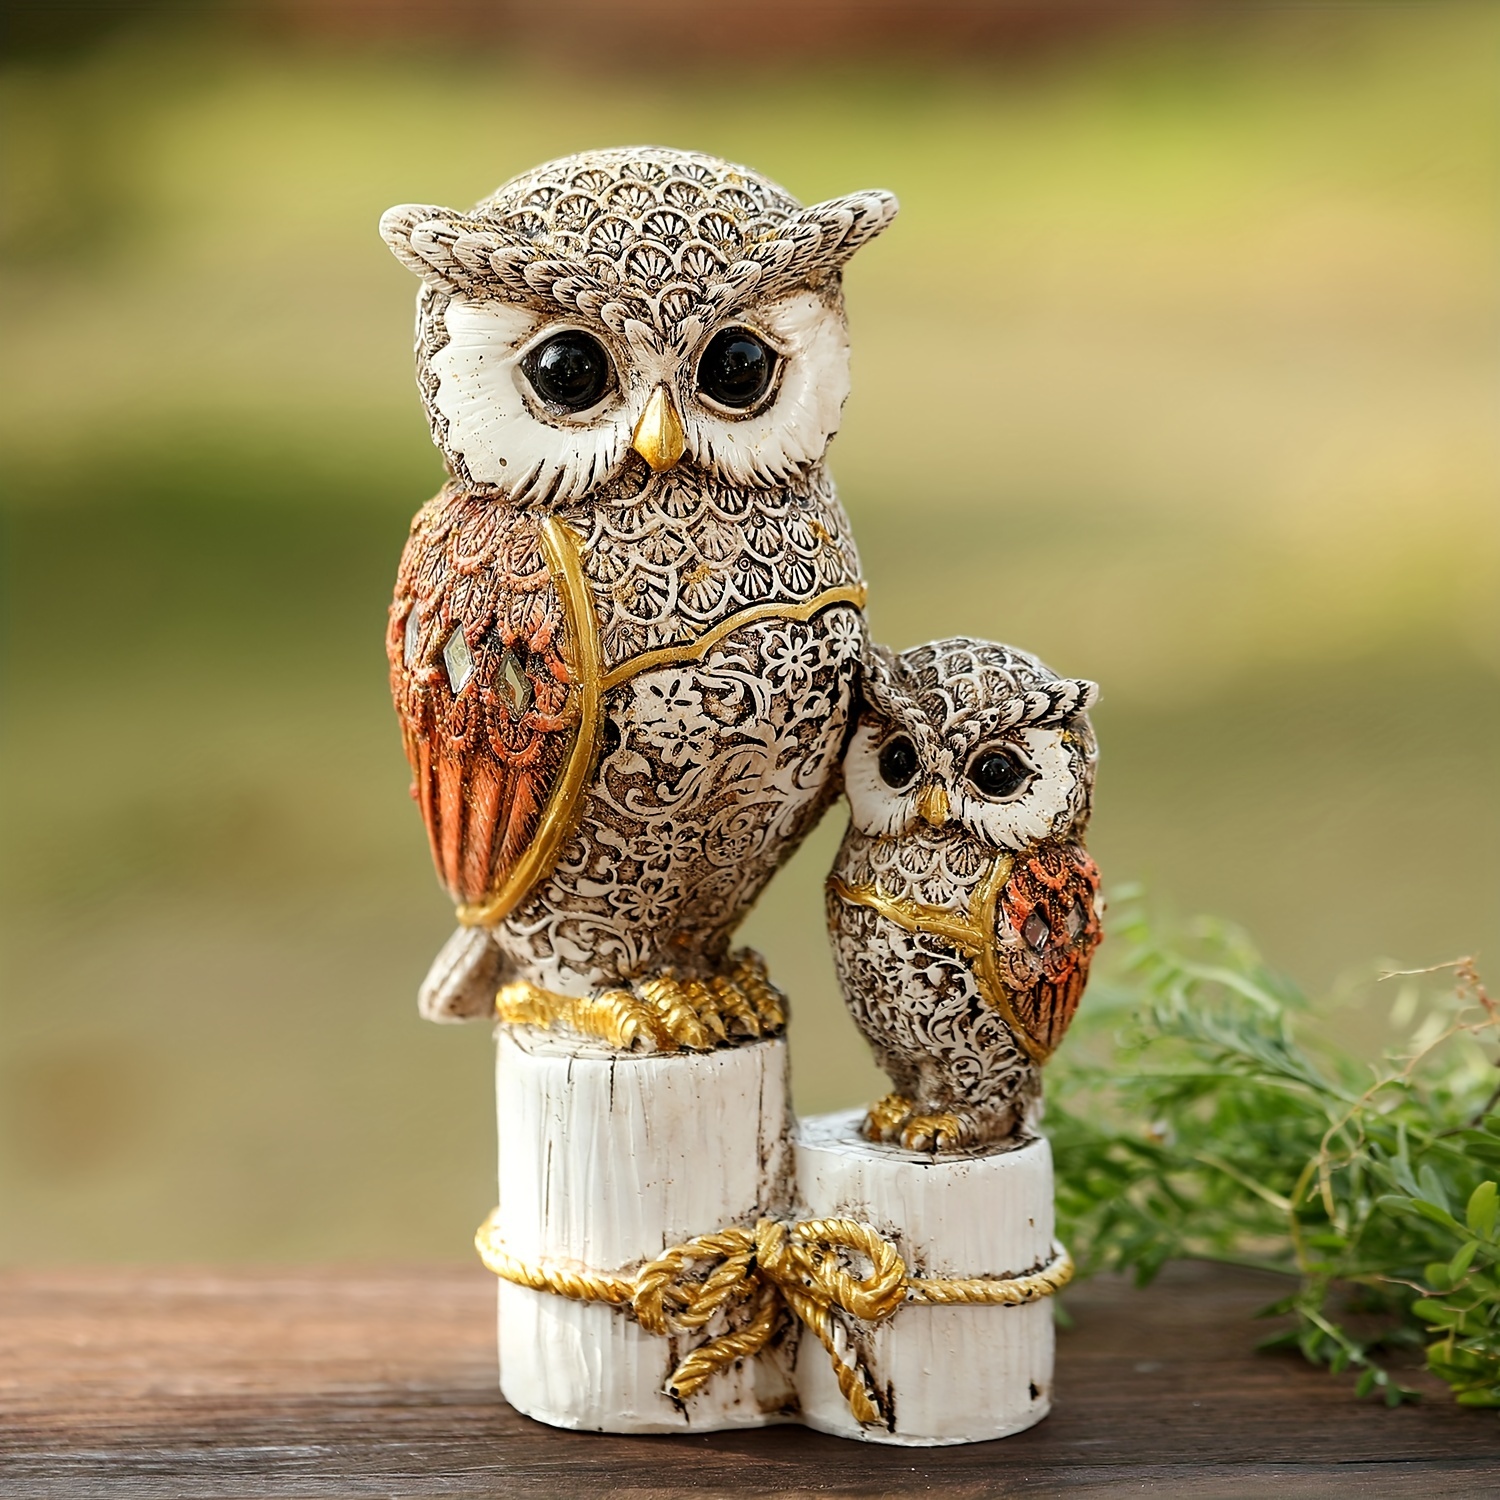 Owl Solar Light with Solar LED Panel Owl Waterproof Outdoor Decor Solar  Powered Path Lawn Yard Home Garden Lamps Statues on OnBuy